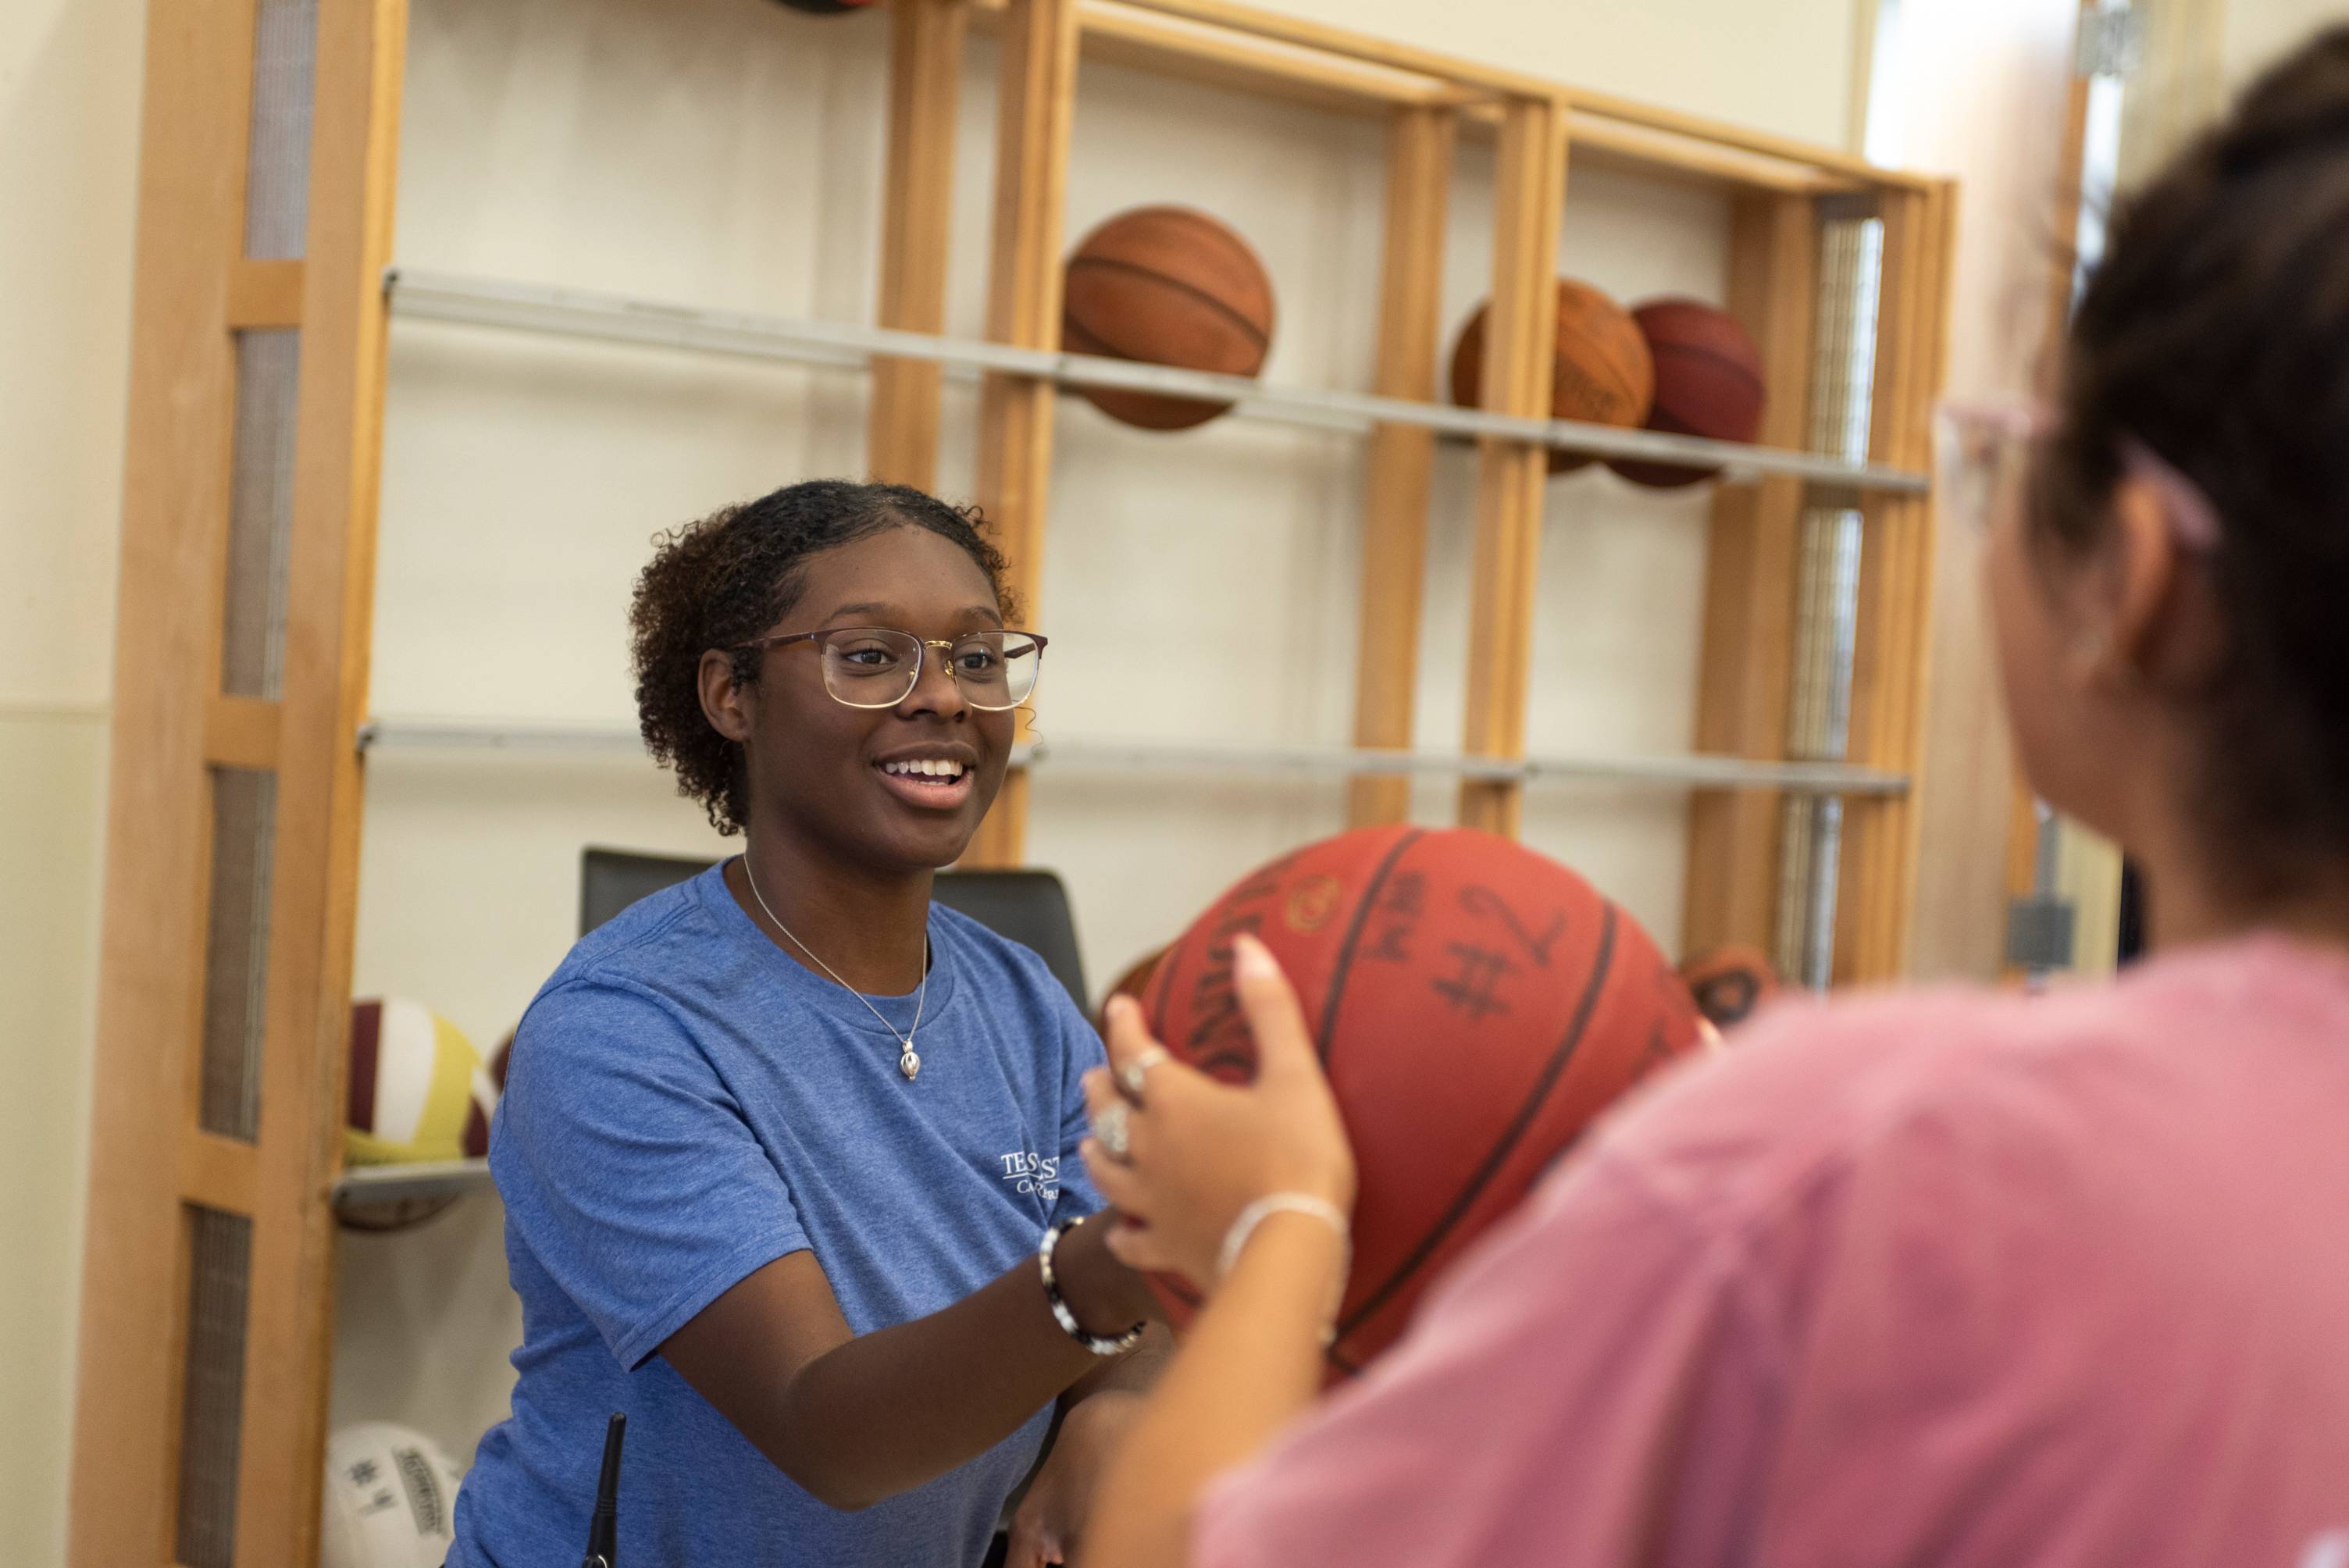 Student renting out a basketball